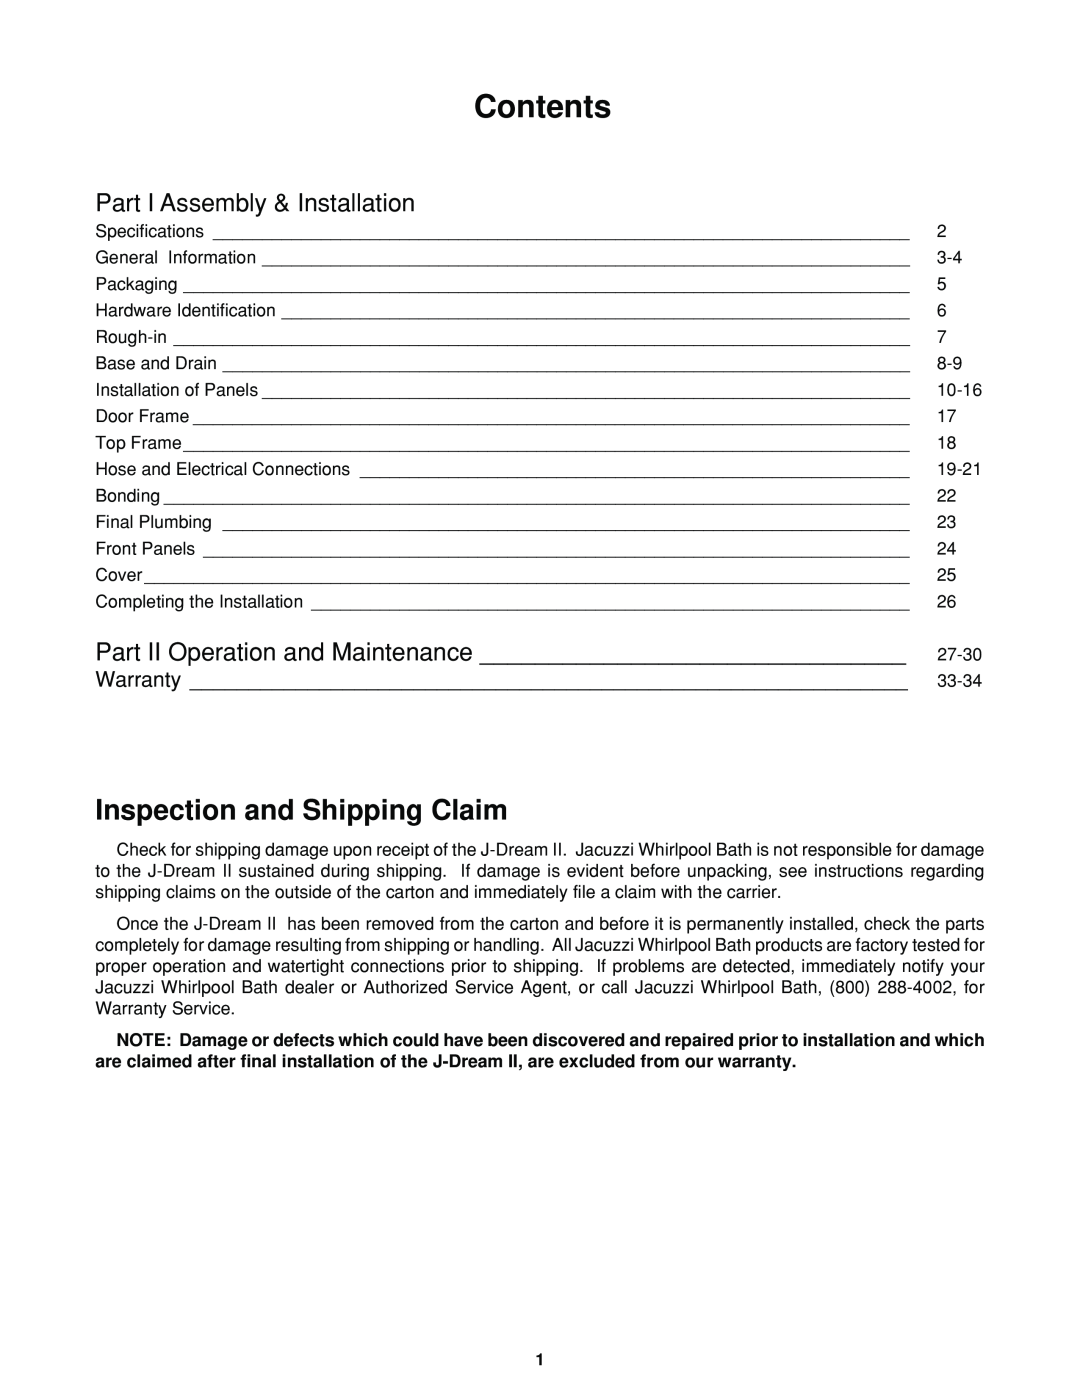 Jacuzzi J-DREAM II owner manual Contents, Inspection and Shipping Claim, Part I Assembly & Installation 